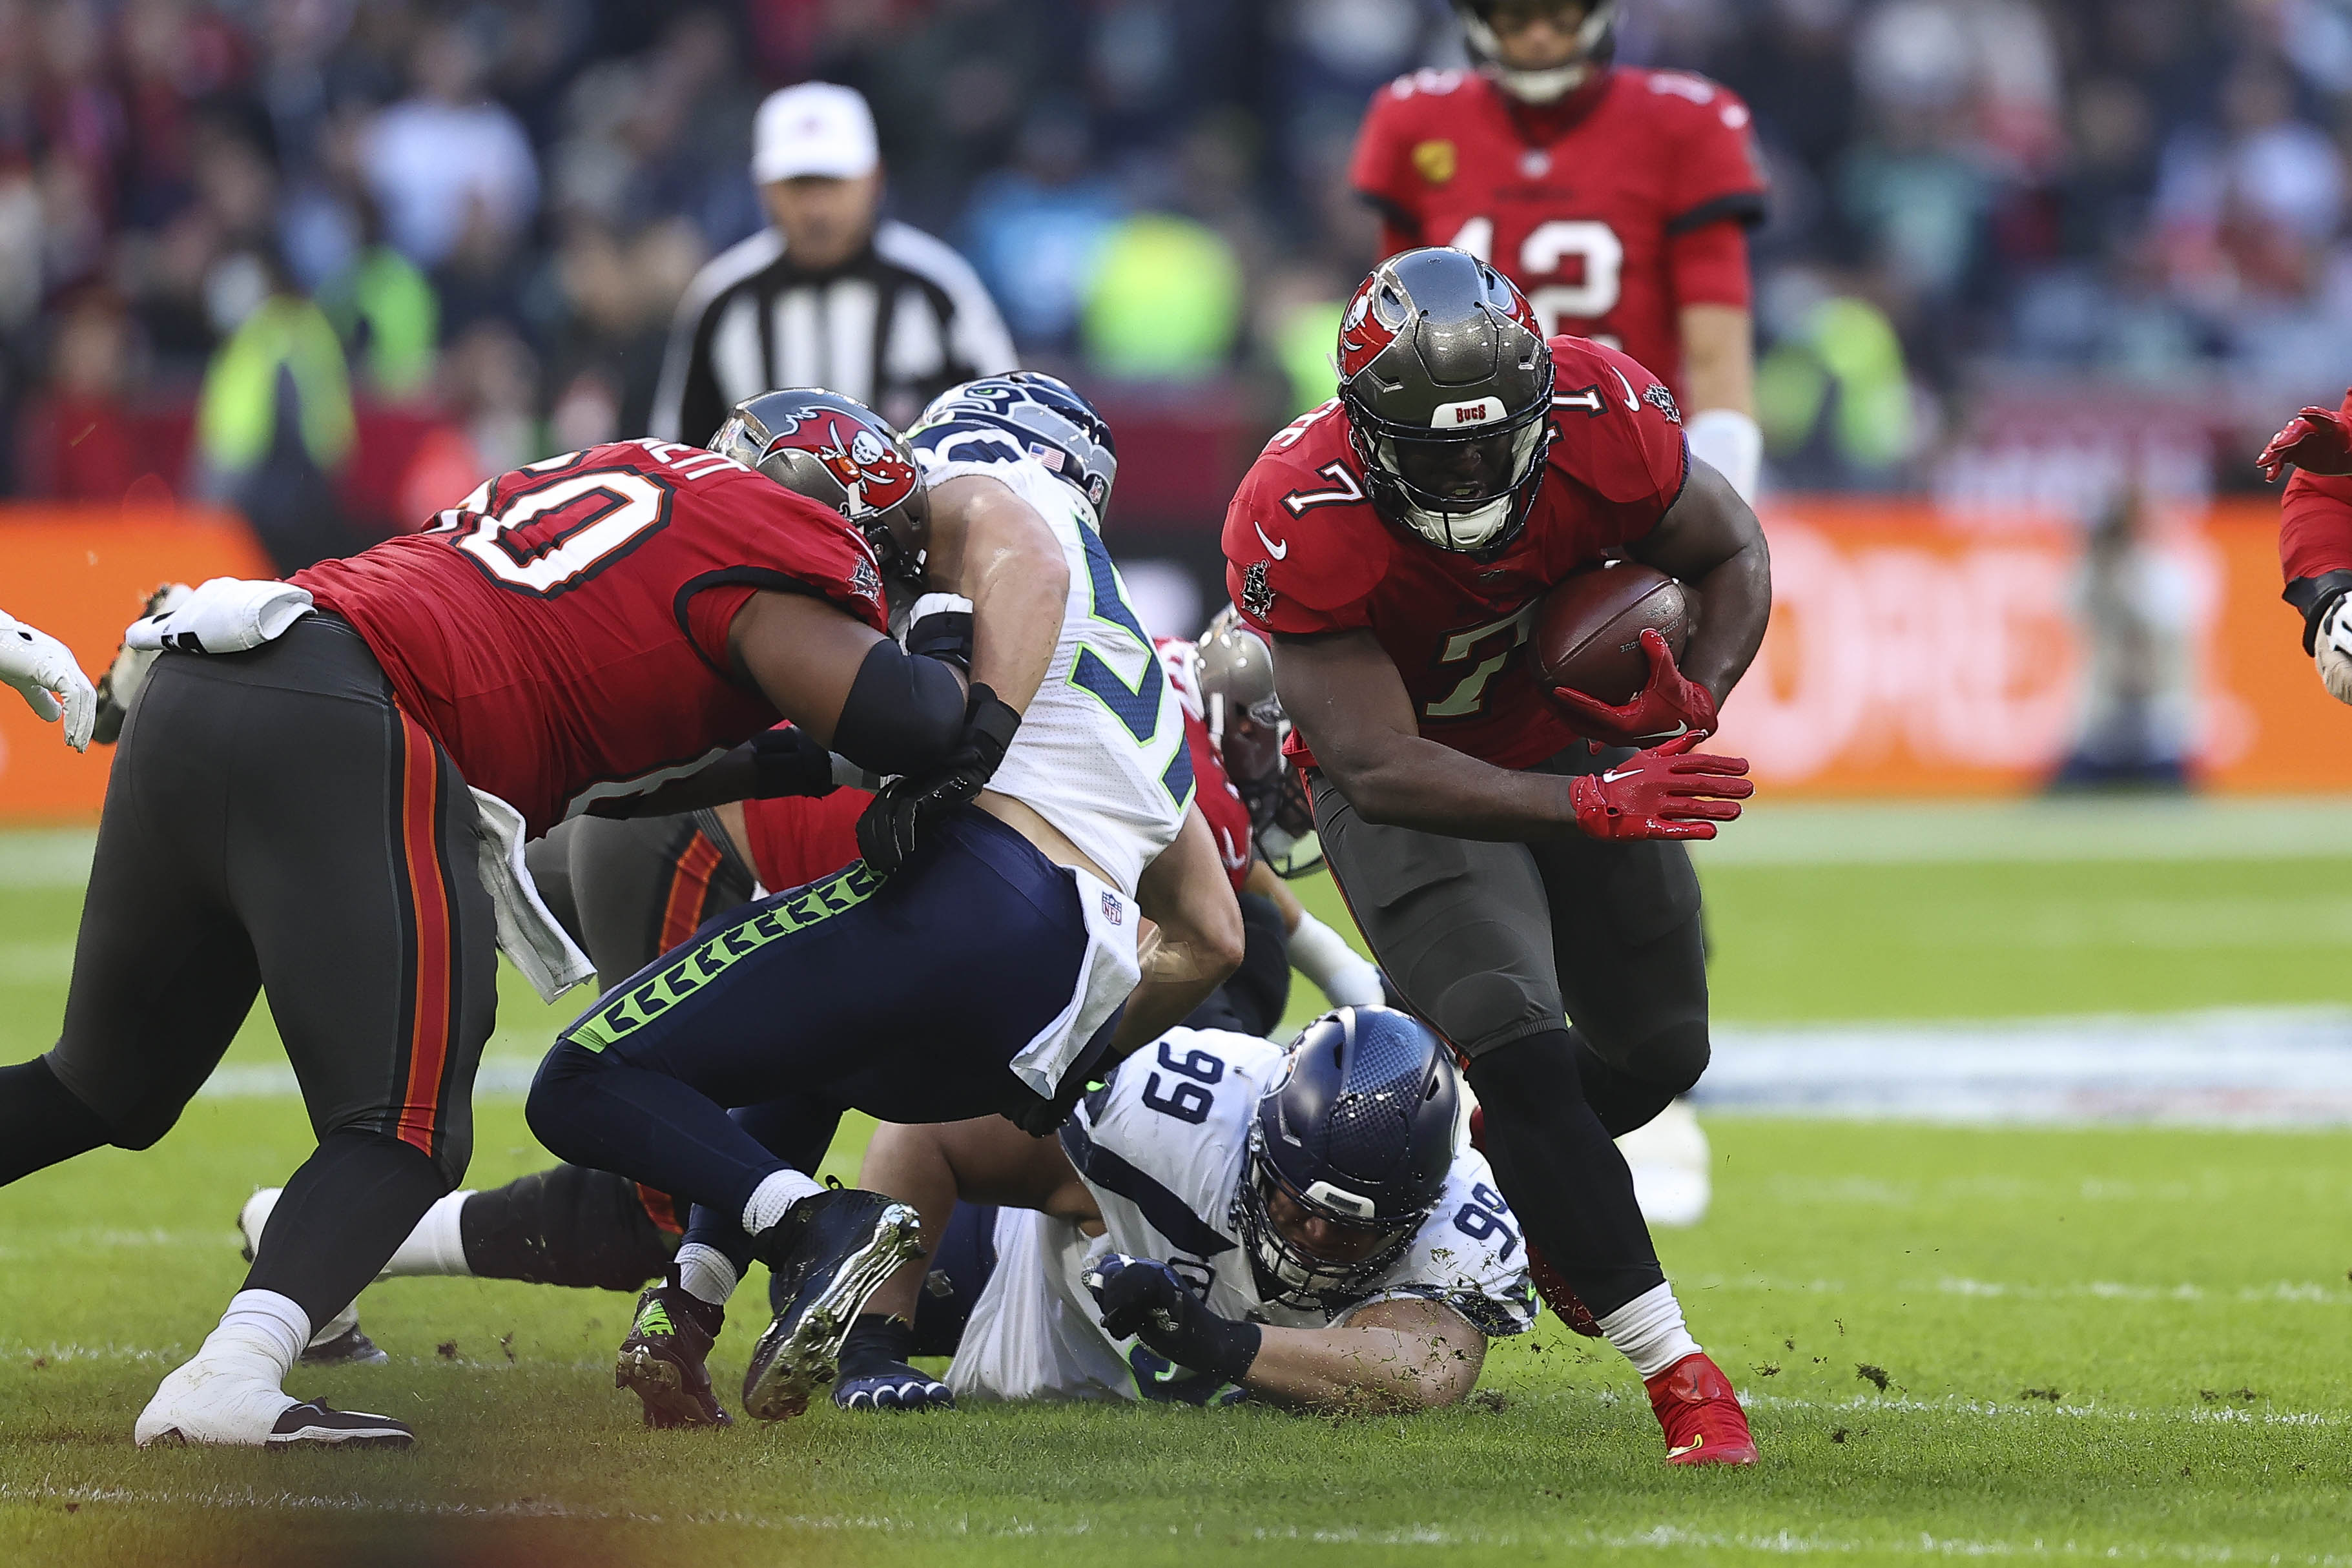 Vita Vea of Tampa Bay Buccaneers, Cody Barton of Seattle Seahawks, Al Woods of Seattle Seahawks and Leonard Fournette of Tampa Bay Buccaneers battle for the ball during the NFL match between Seattle Seahawks&nbsp;and Tampa Bay Buccaneers at Allianz Arena on November 13, 2022 in Munich, Germany.